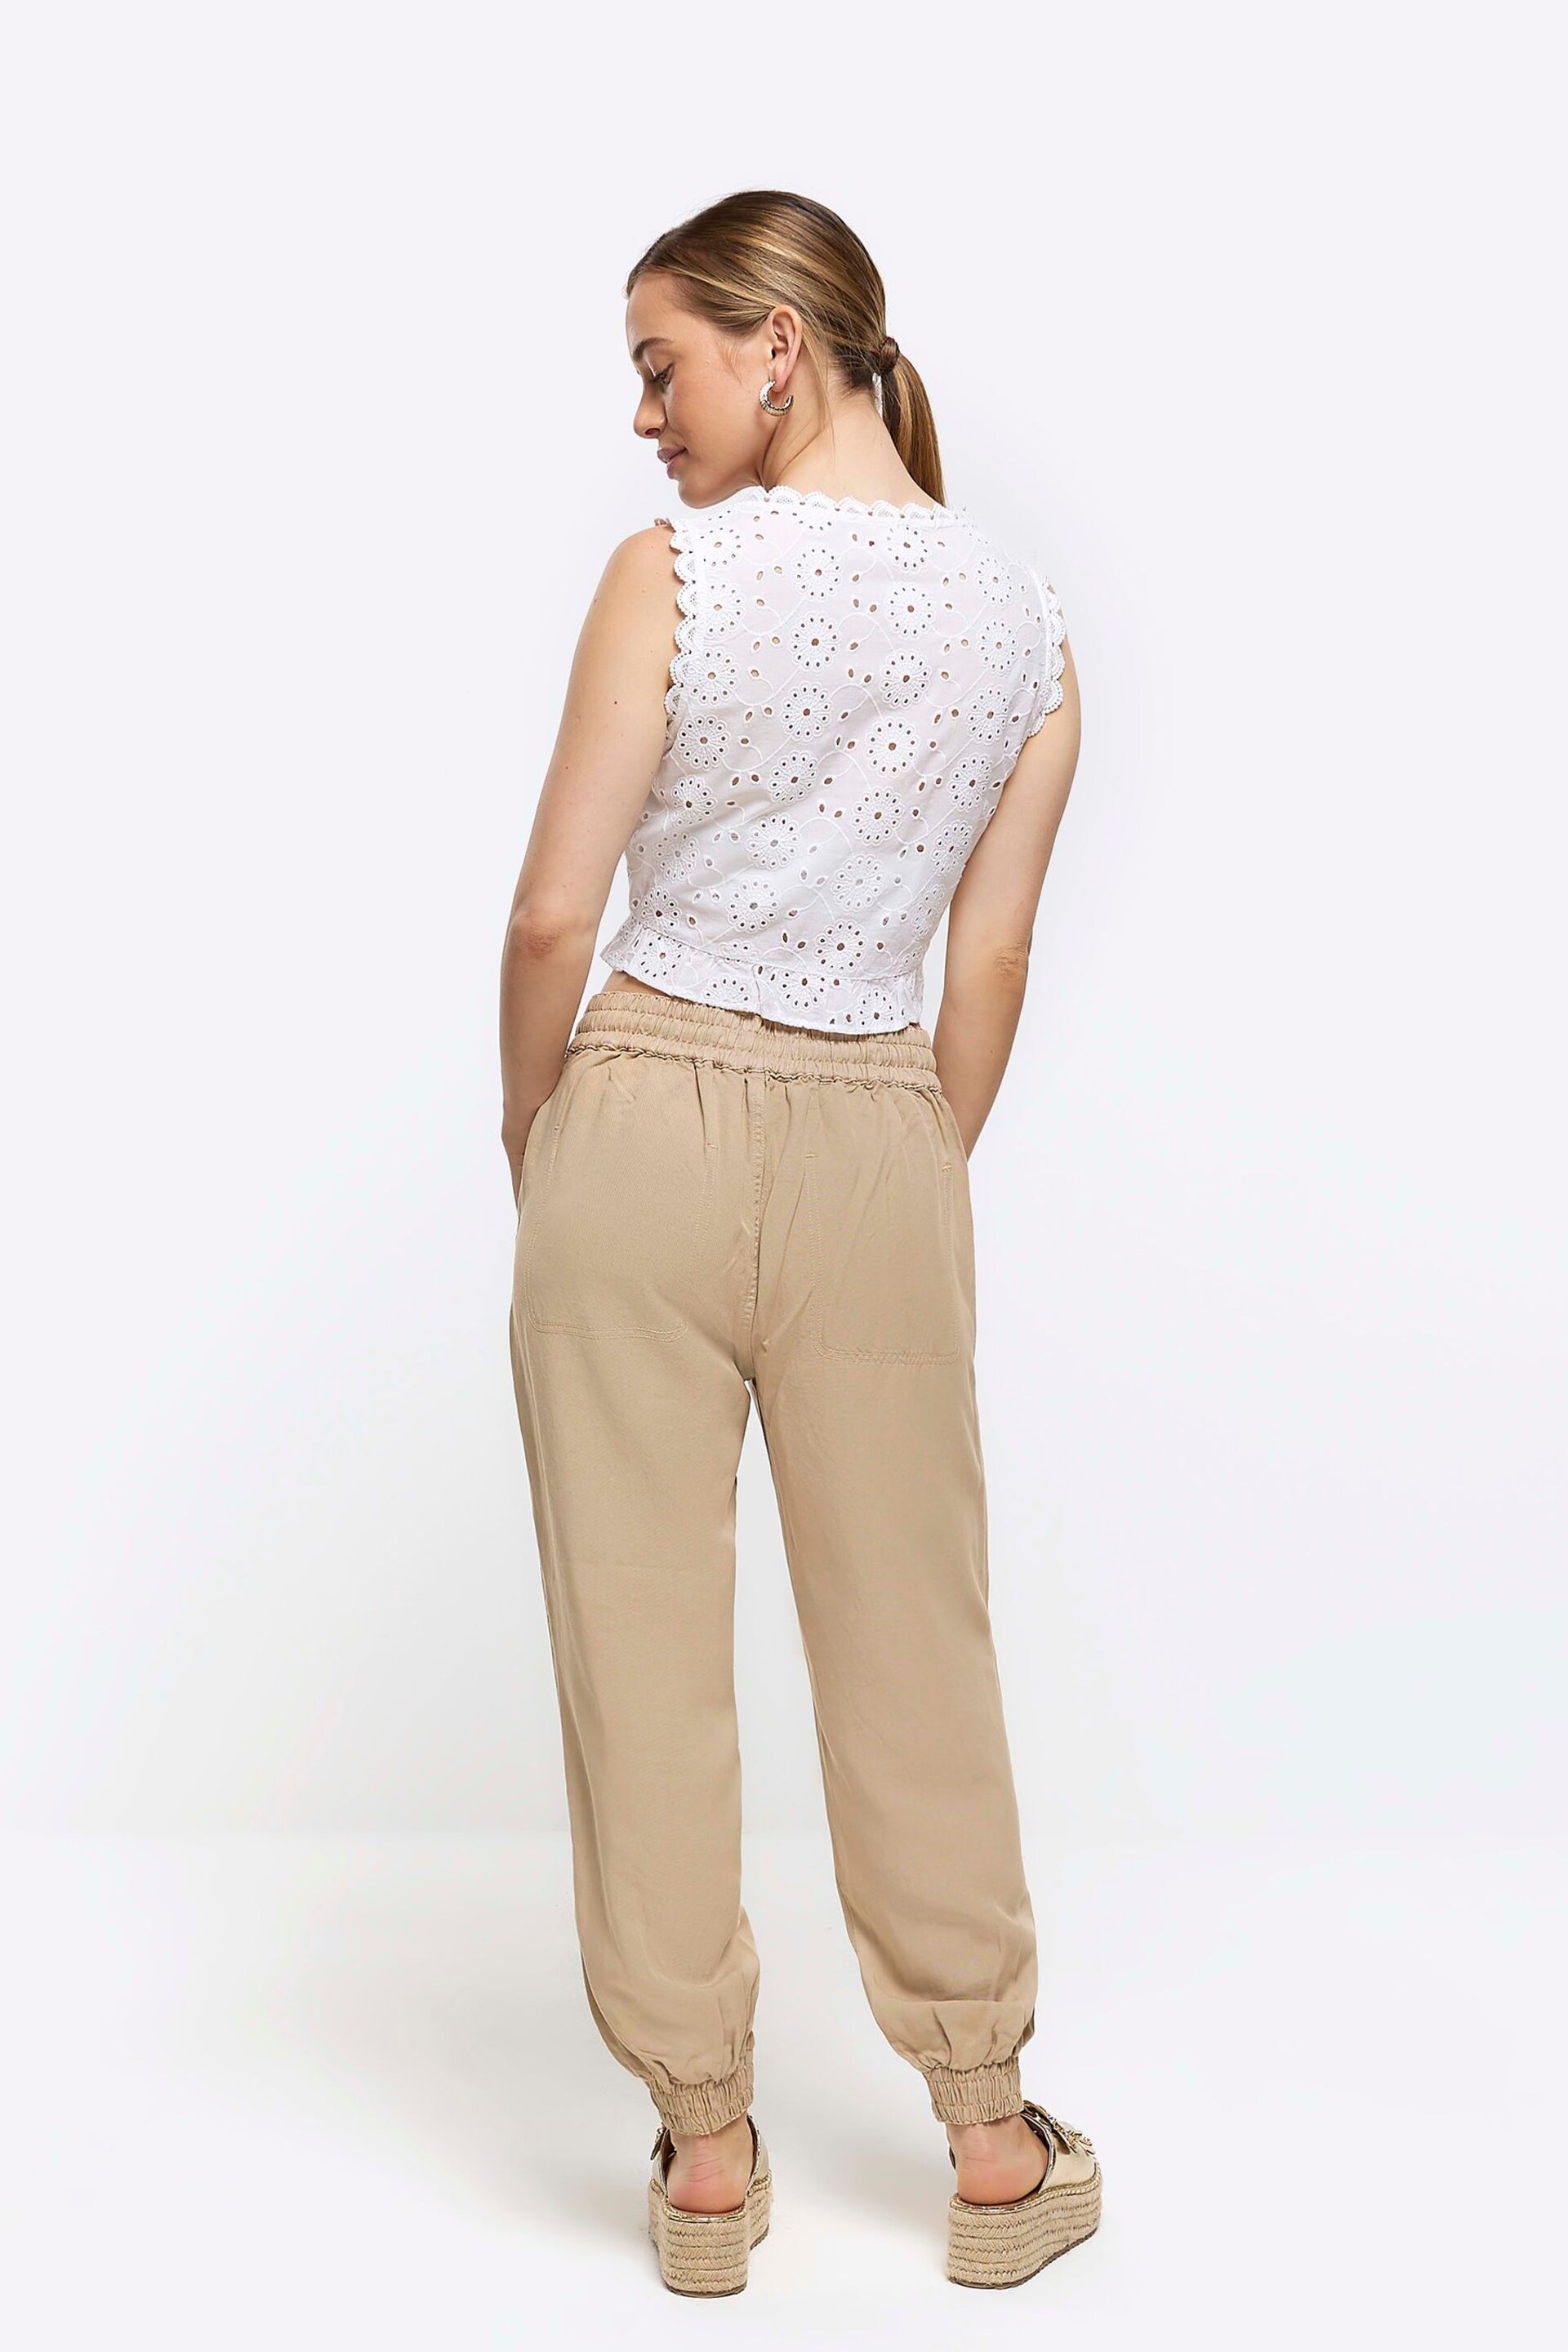 River Island Brown Petite Cuffed Easy Joggers - Image 2 of 6